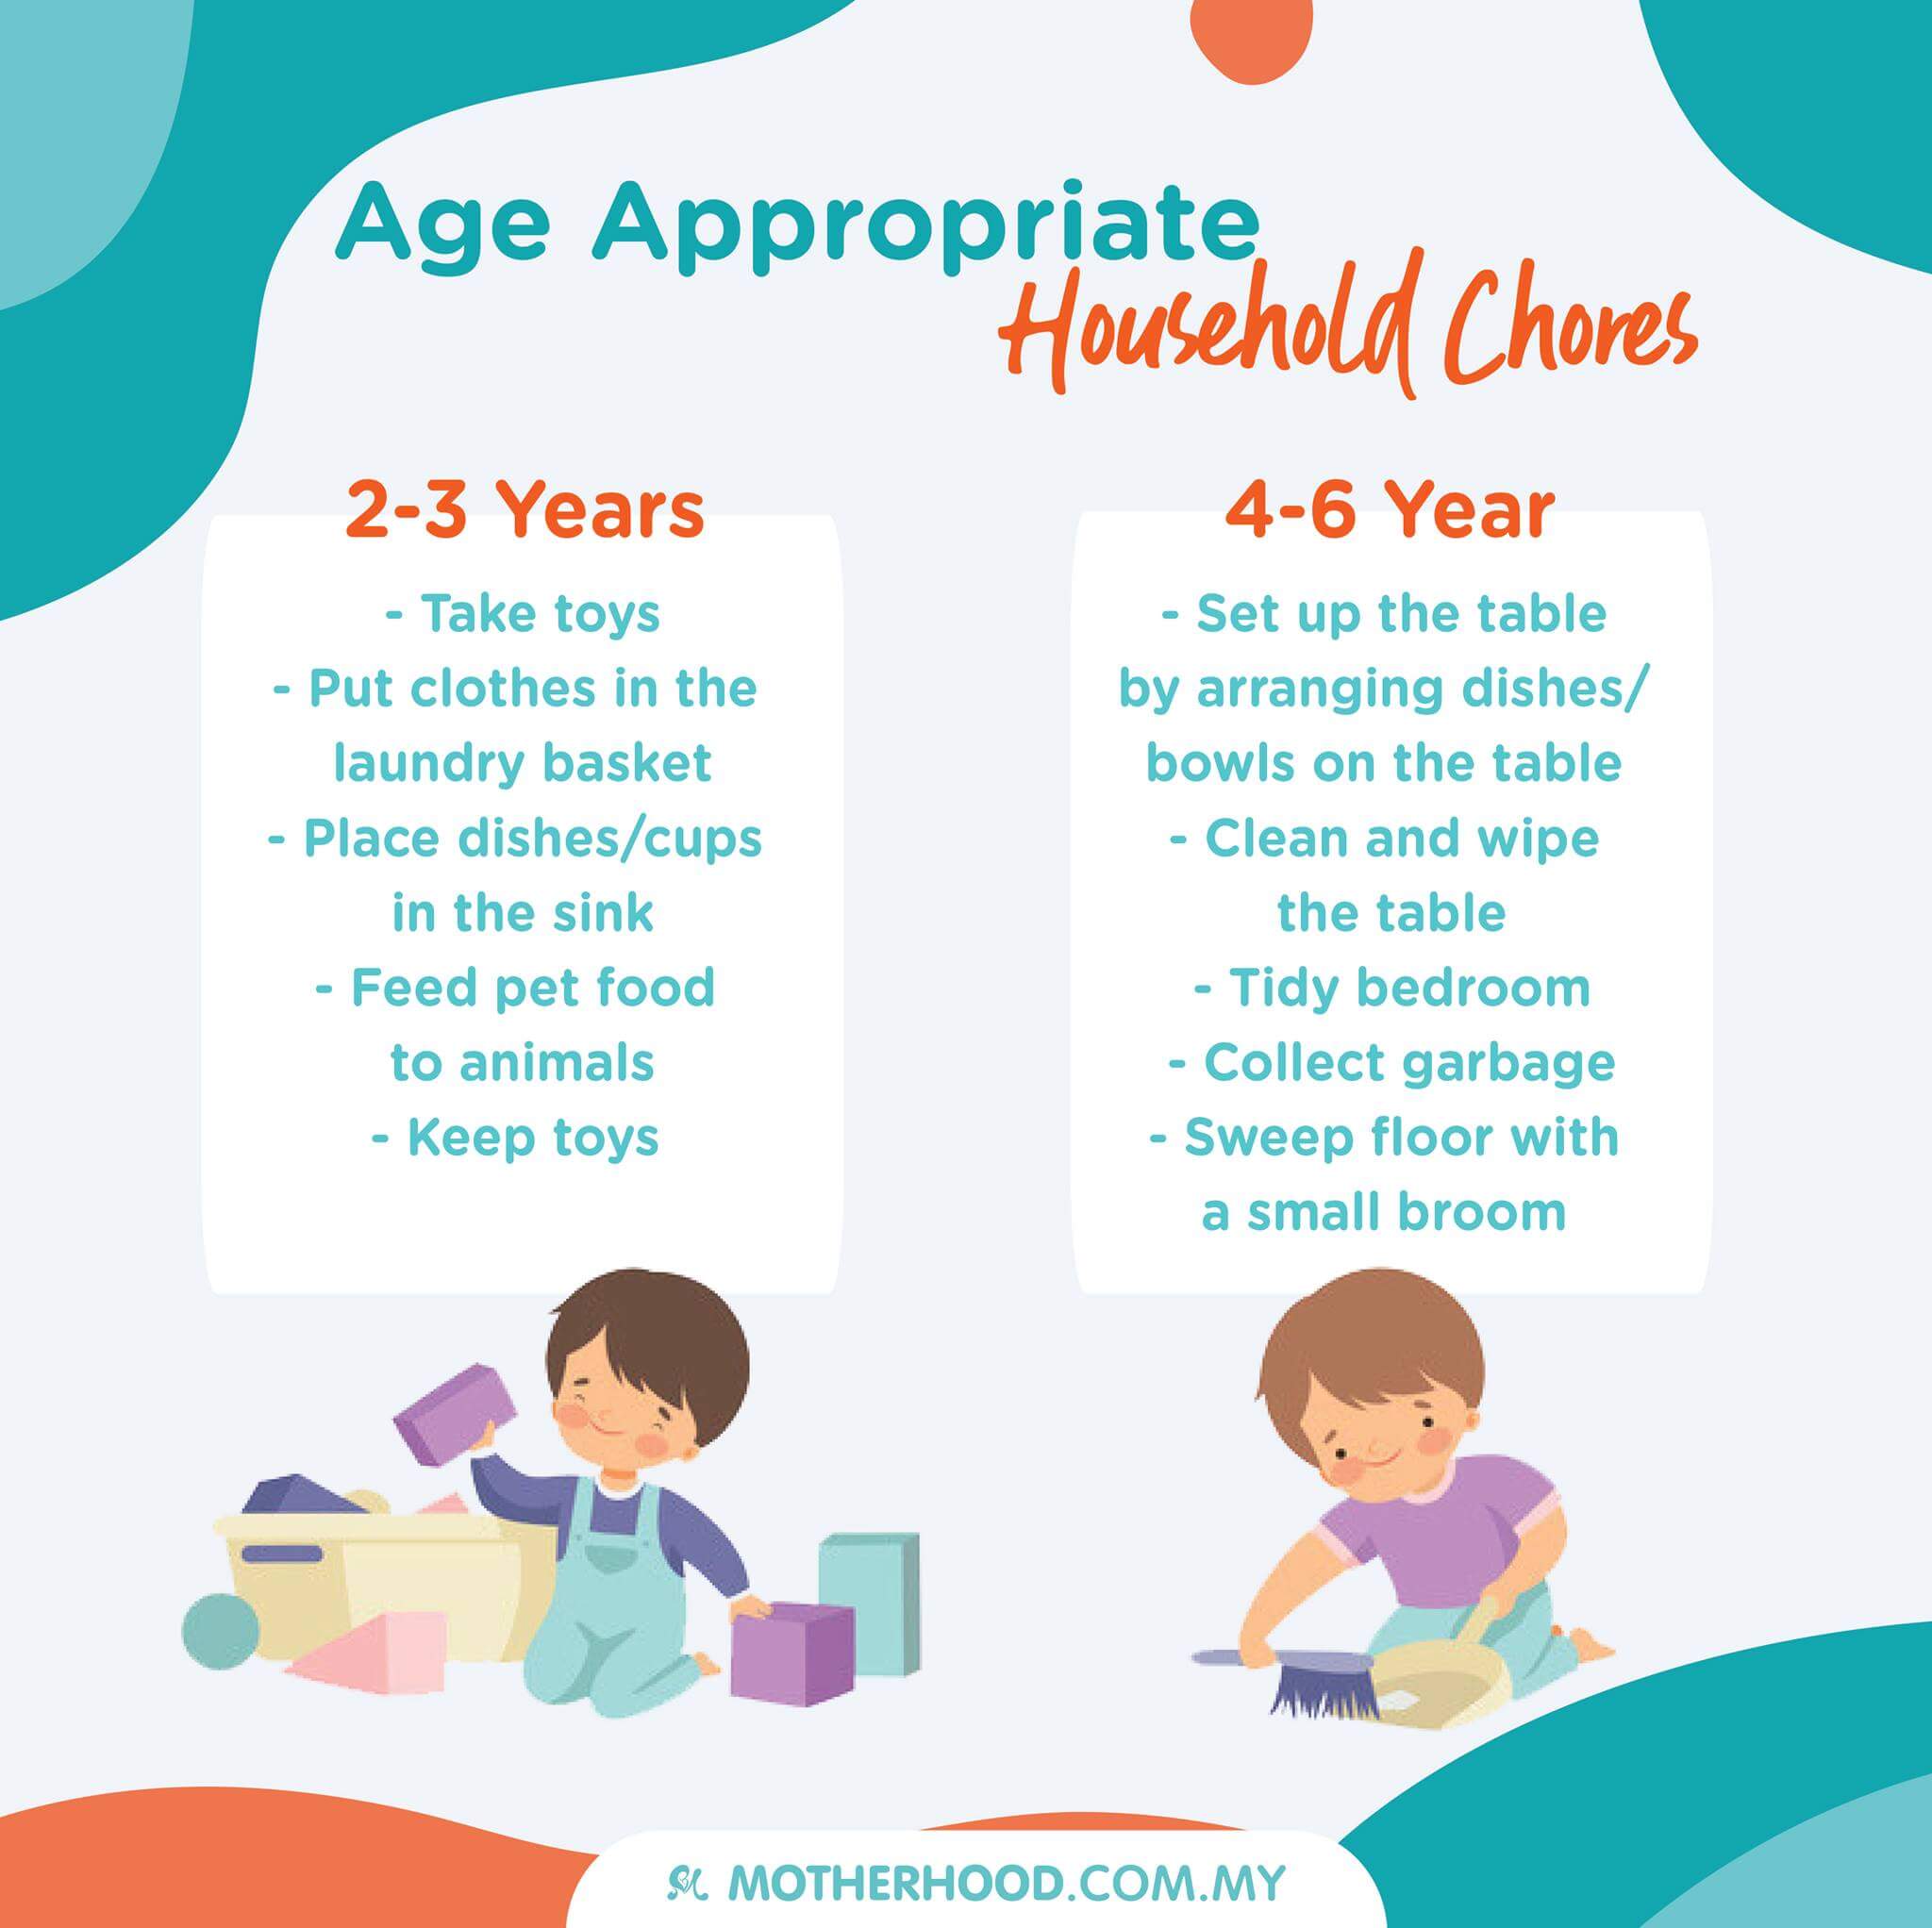 Here's the guide for delegating different household chores among your children